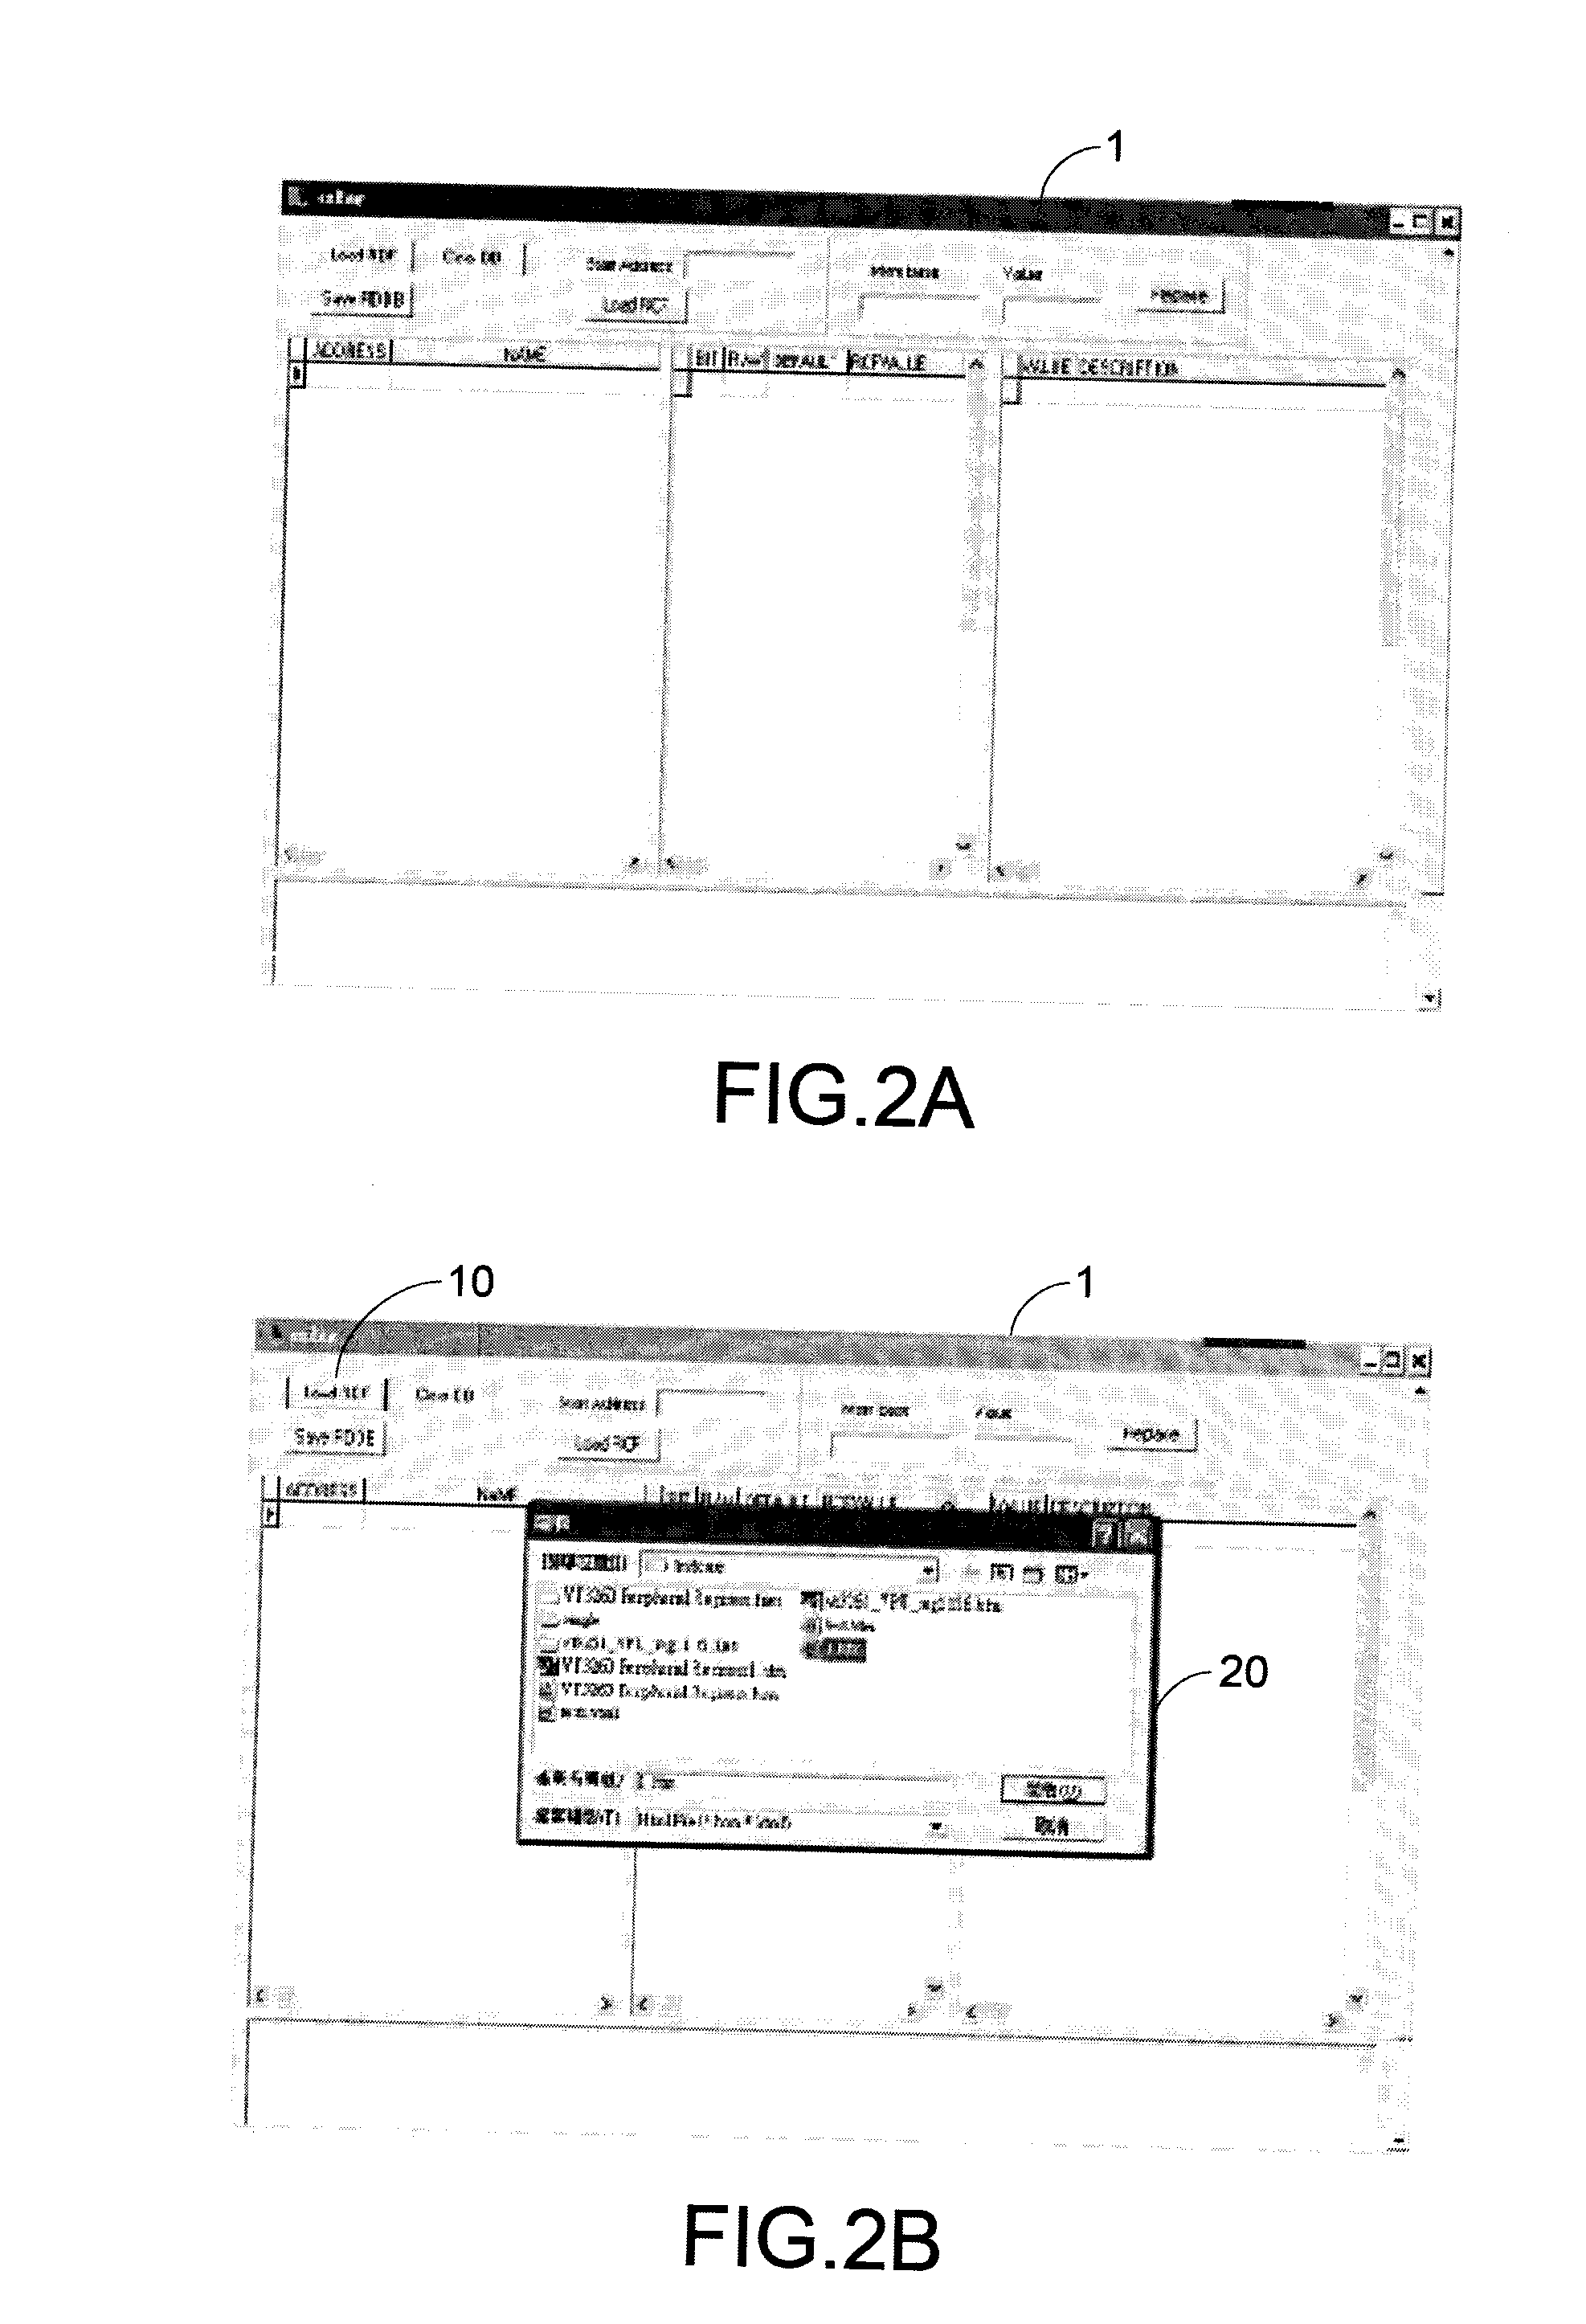 Method and system for parsing contents of memory device